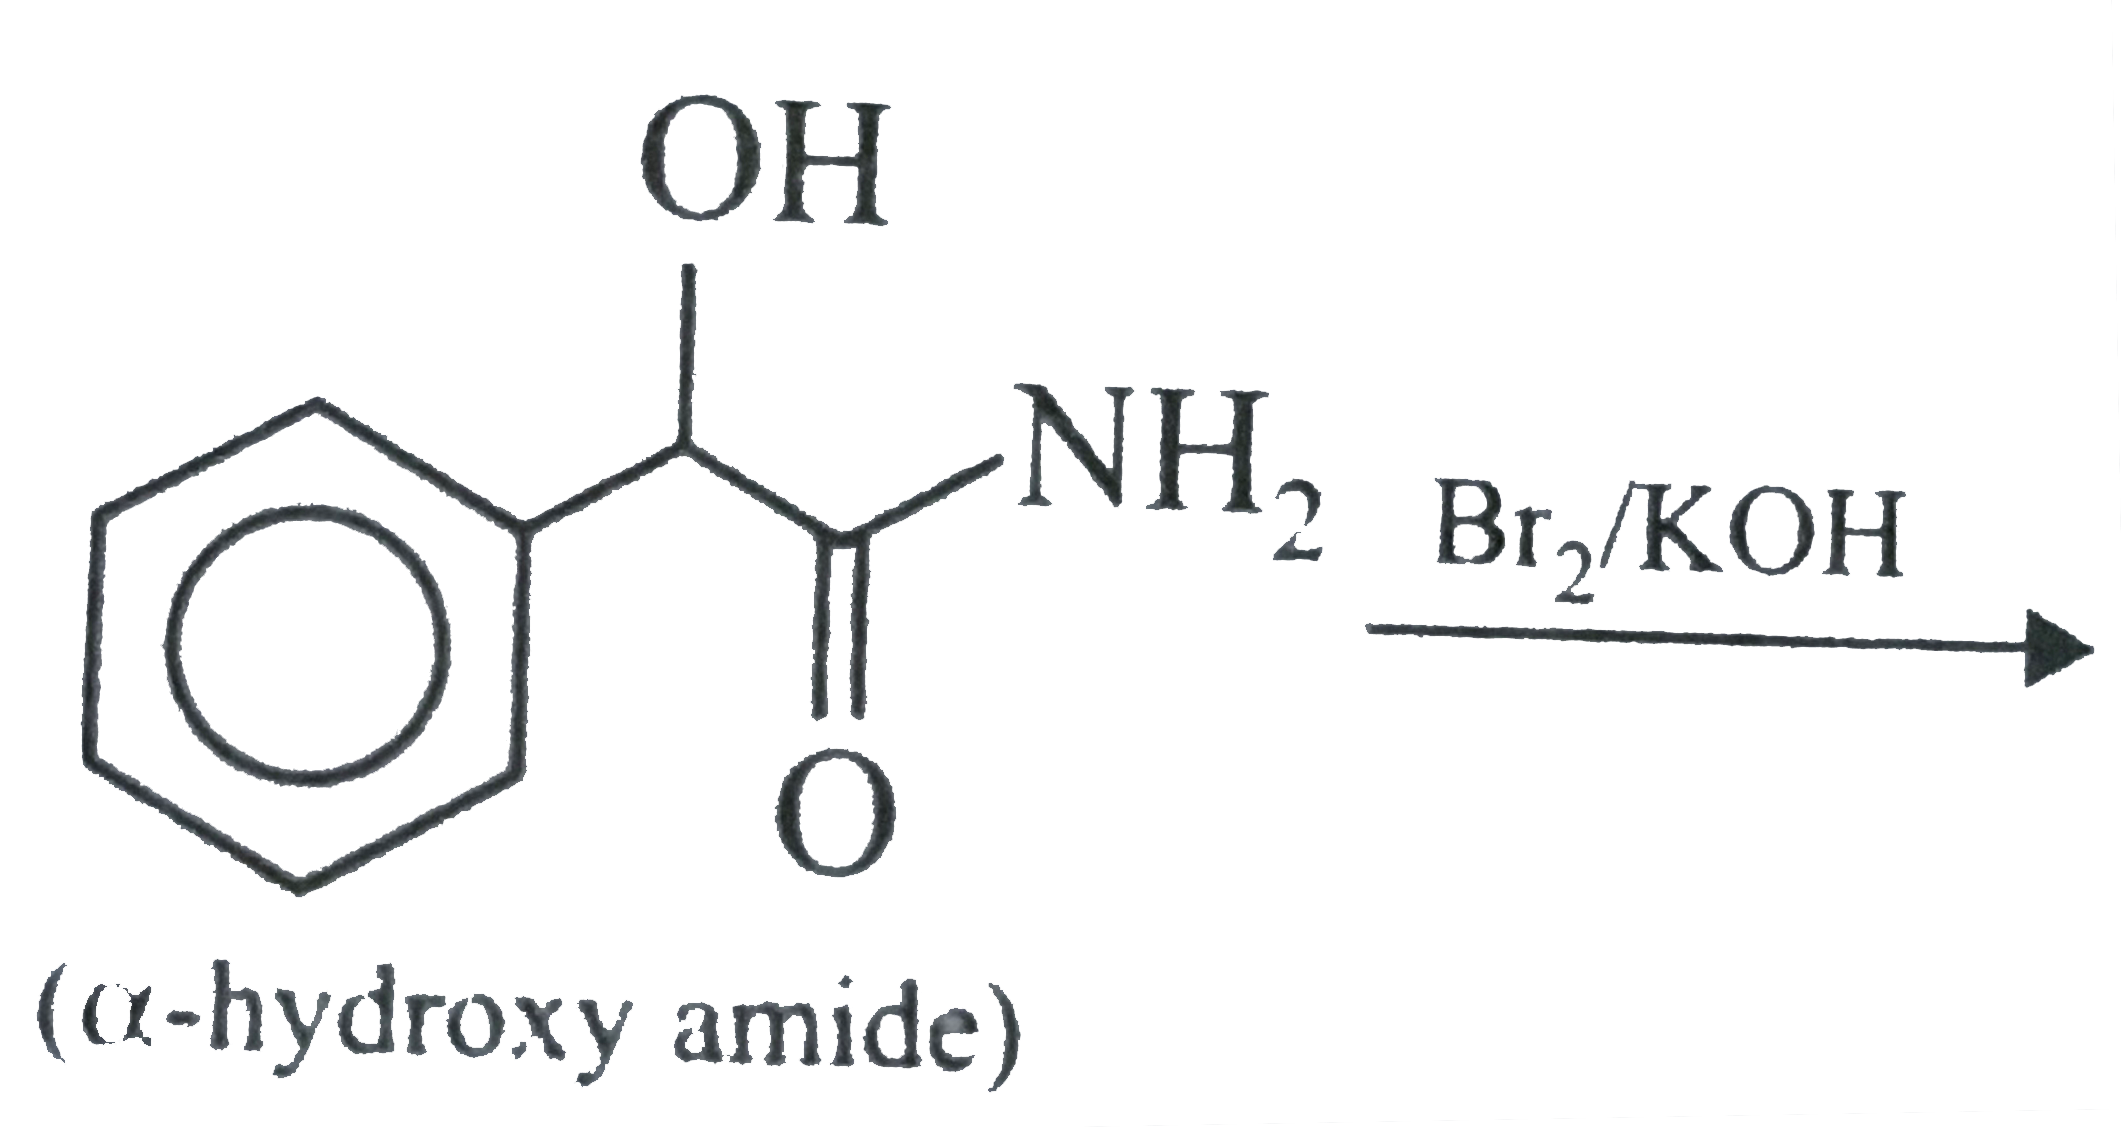 Product of this Hofmann bromamide reaction is